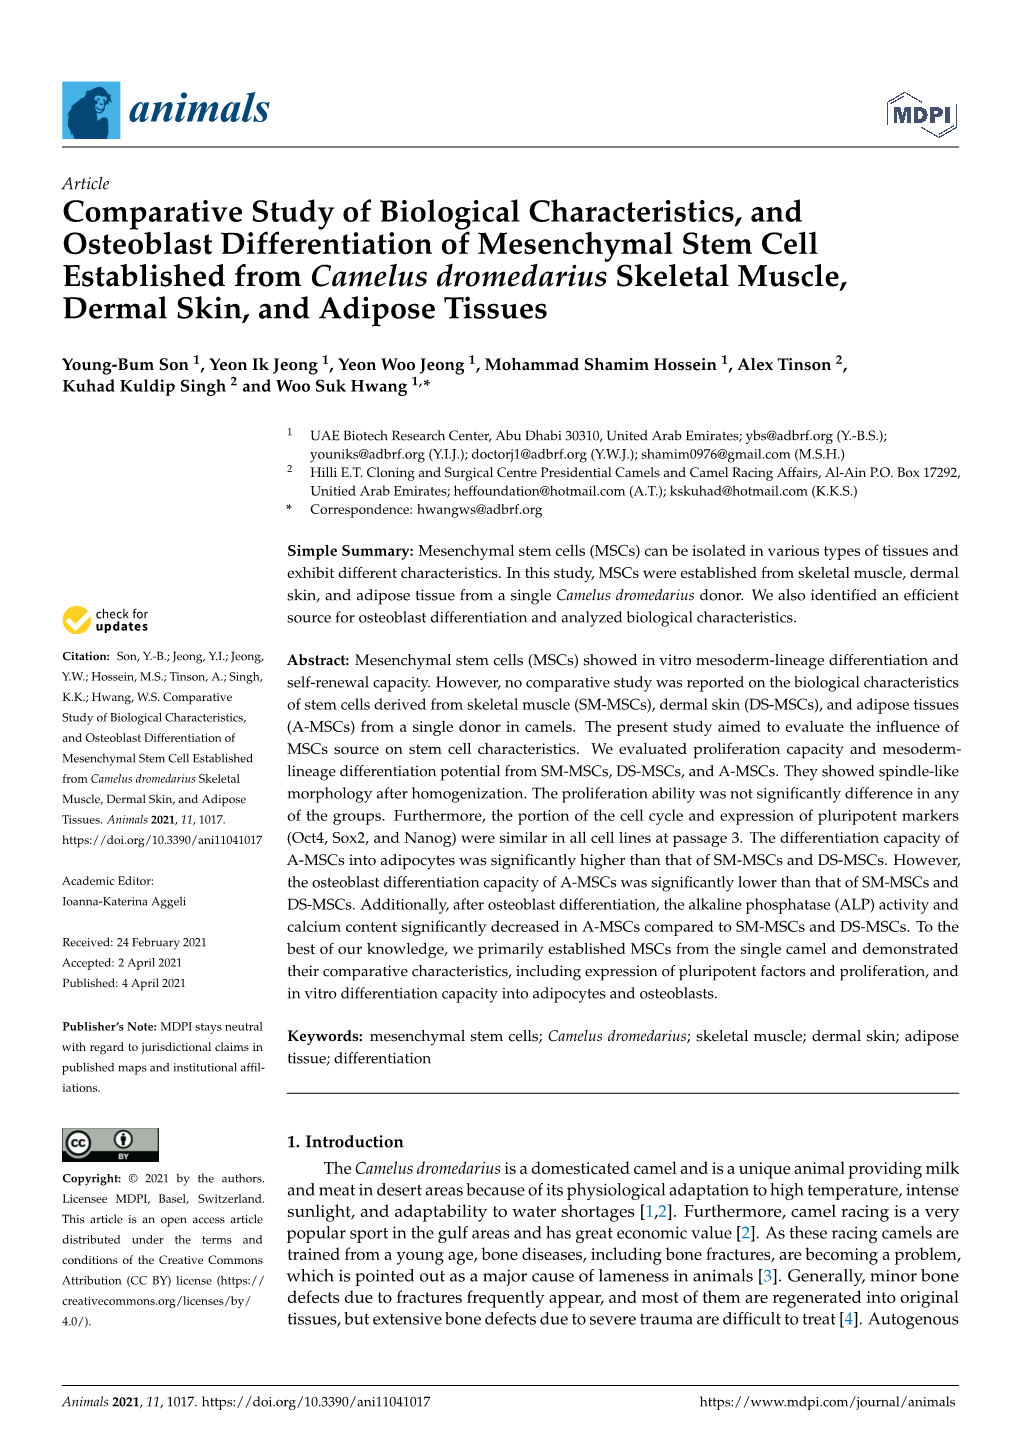 Comparative Study of Biological Characteristics, and Osteoblast Differentiation of Mesenchymal Stem Cell Established from Camelu